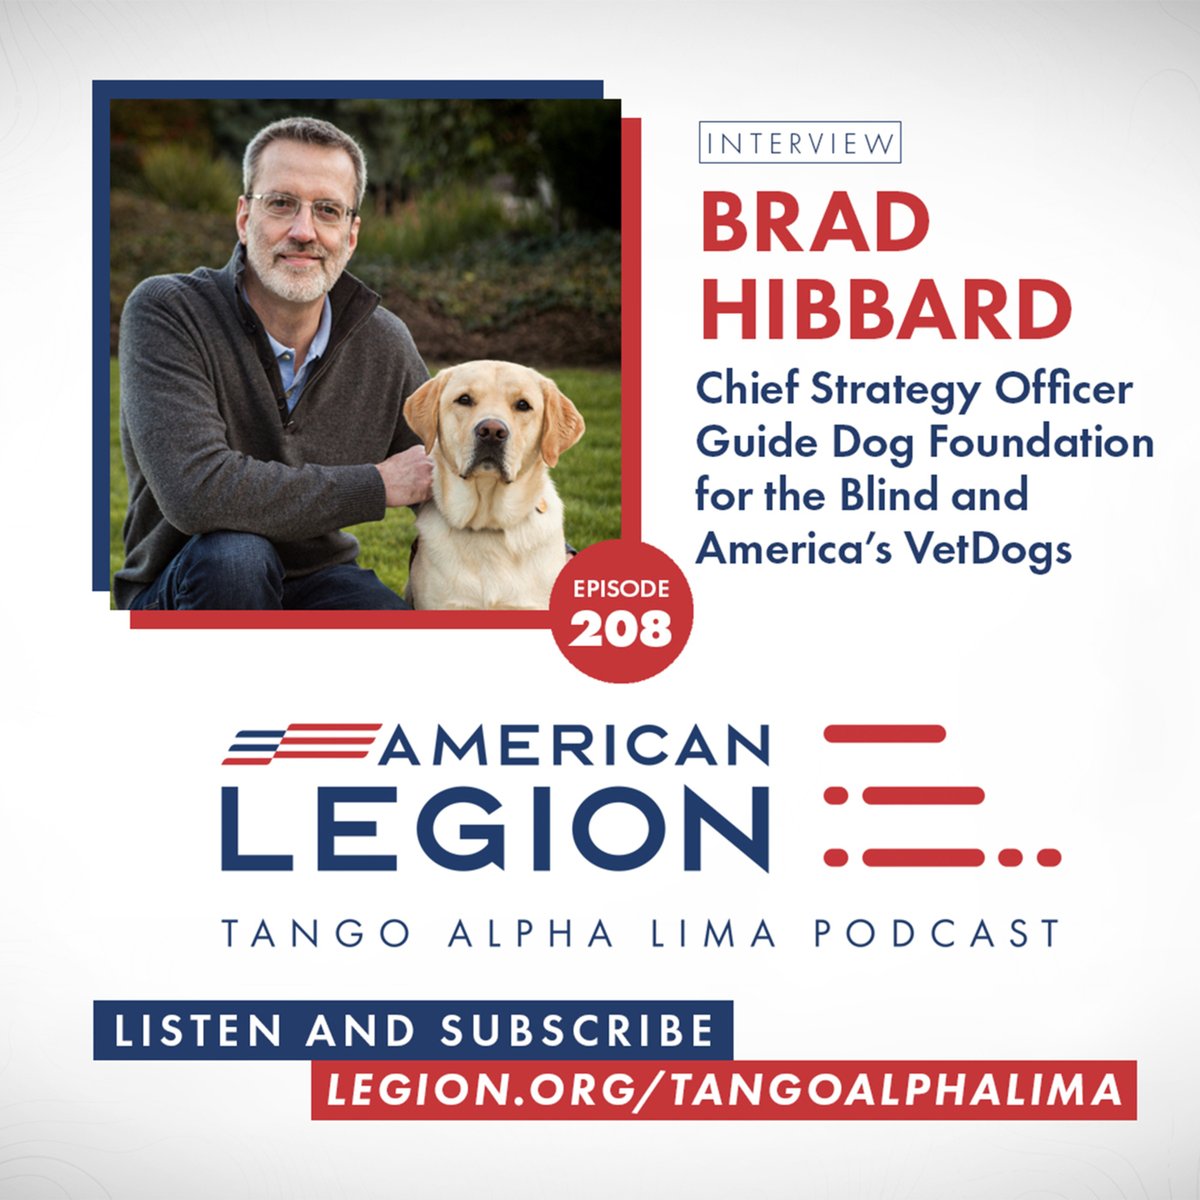 It’s an exciting day when America's VetDogs program graduates Stacy Pearsall and Joe Worley get to interview Brad Hibbard, Chief Strategy Officer for America’s VetDogs and the Guide Dog Foundation on the @AmericanLegion podcast 🤩 Listen here: tangoalphalima.fireside.fm/208